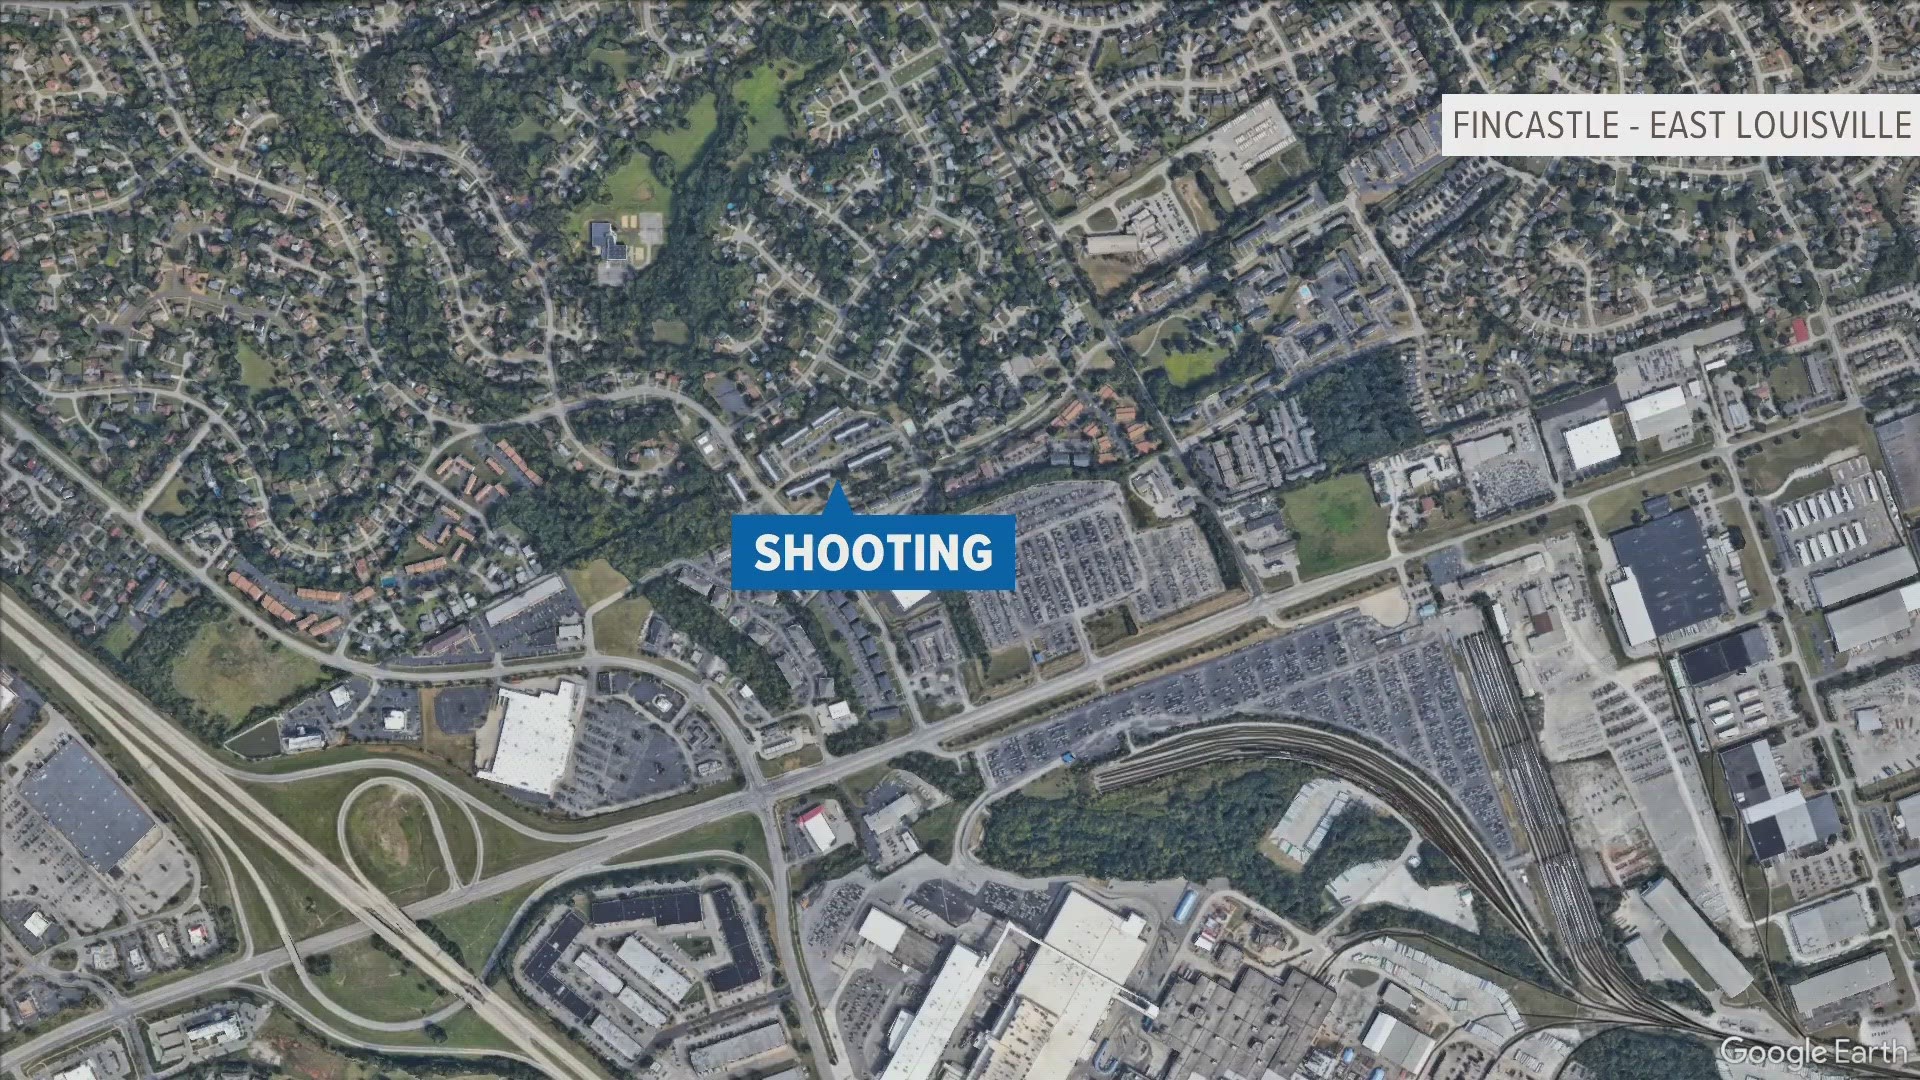 If you know anything about this shooting, you're asked to call LMPD's anonymous tip line.